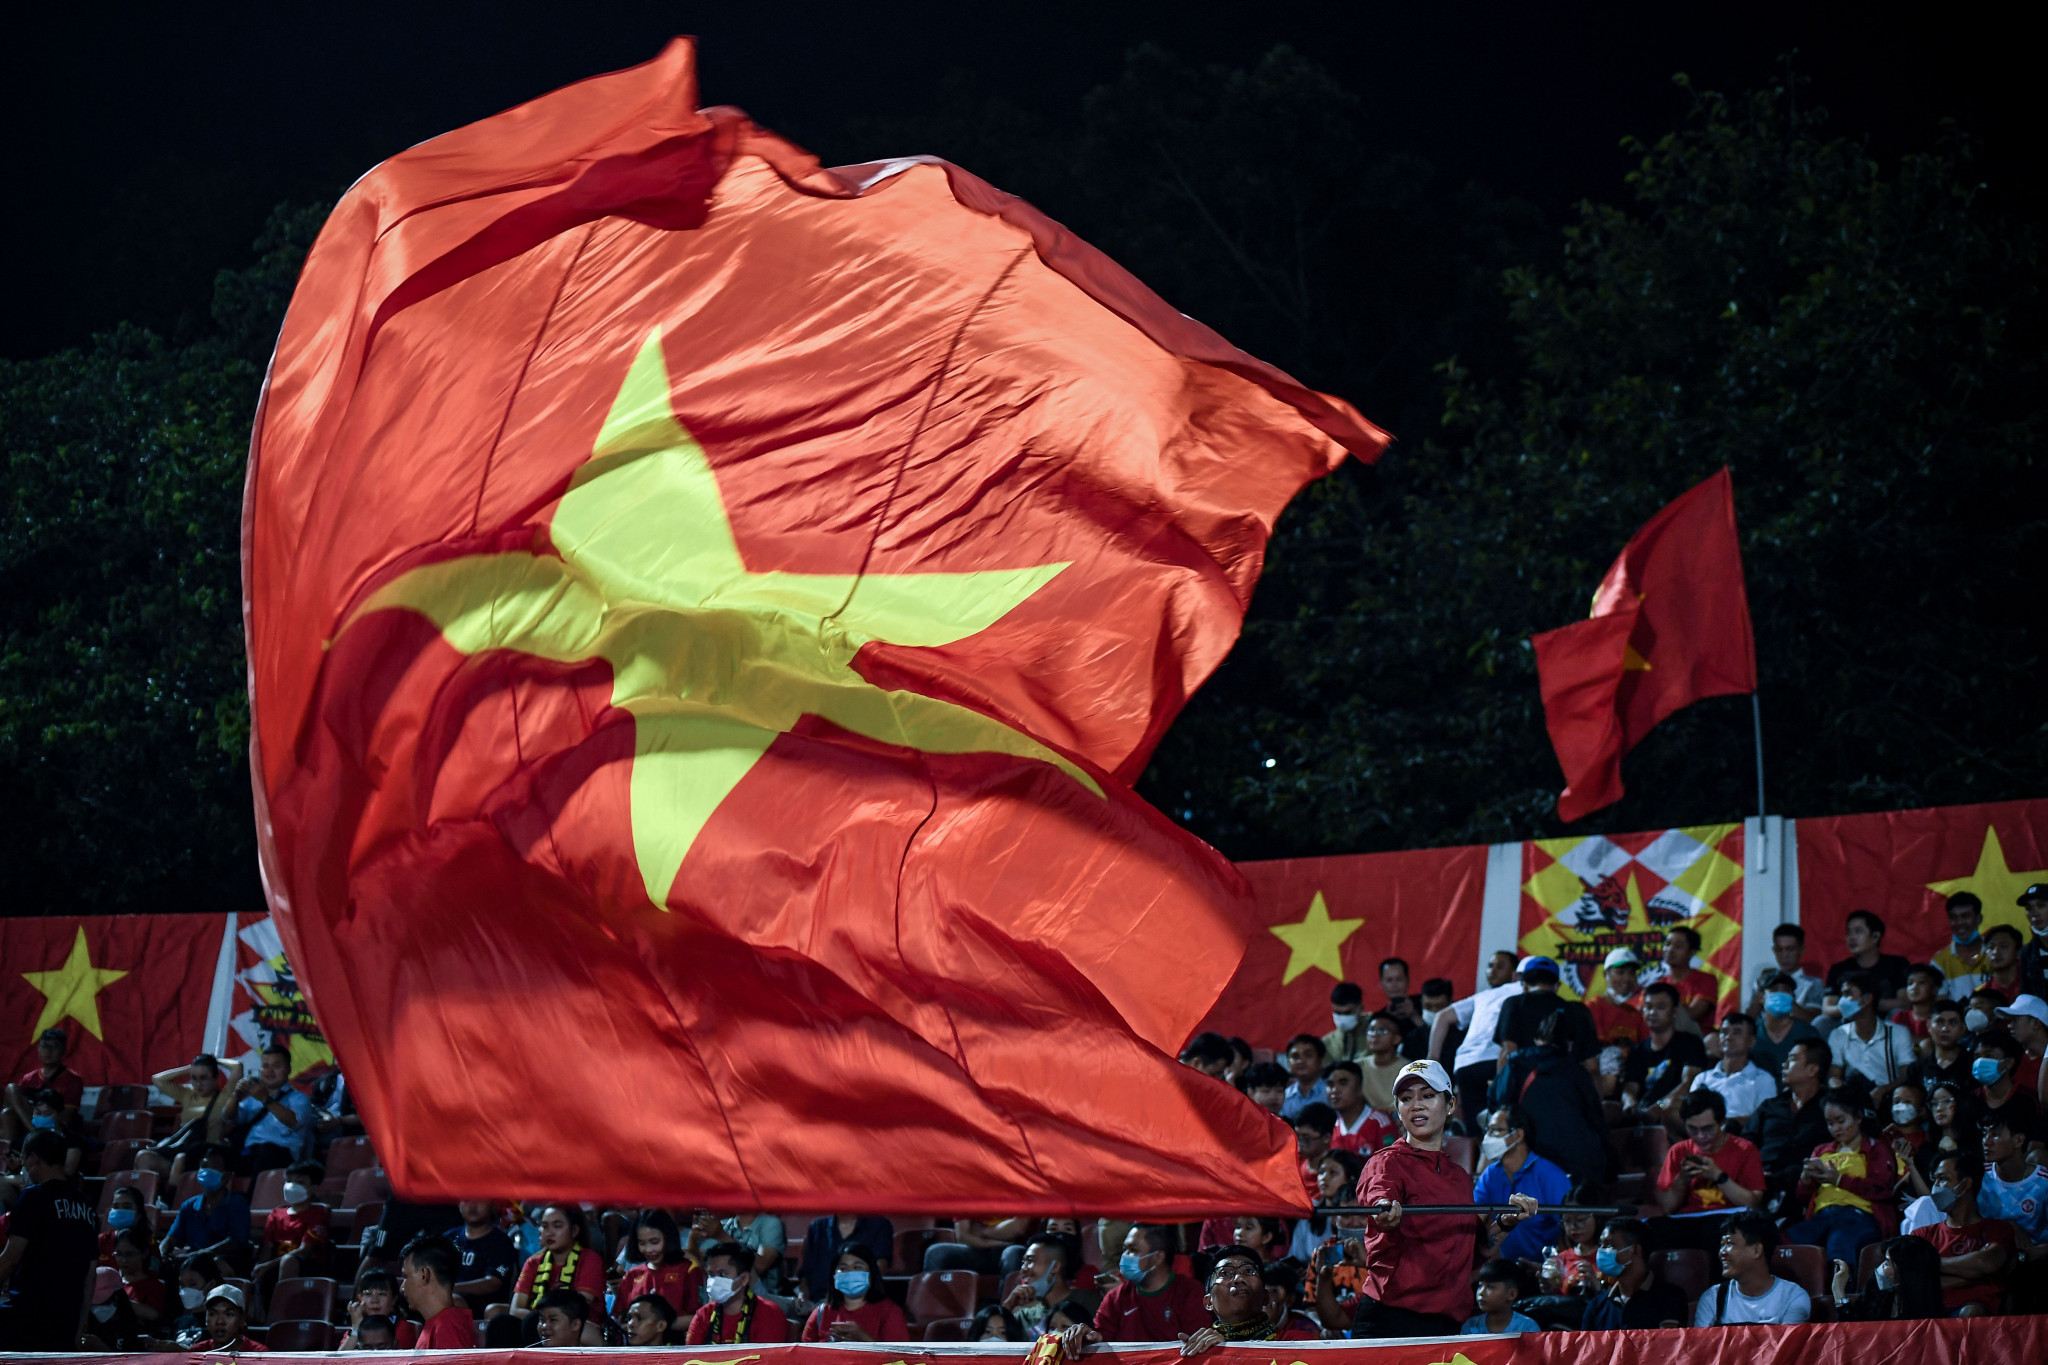 Vietnam won five gold medals in the 2018 Asian Games in Jakarta-Palembang ©Getty Images